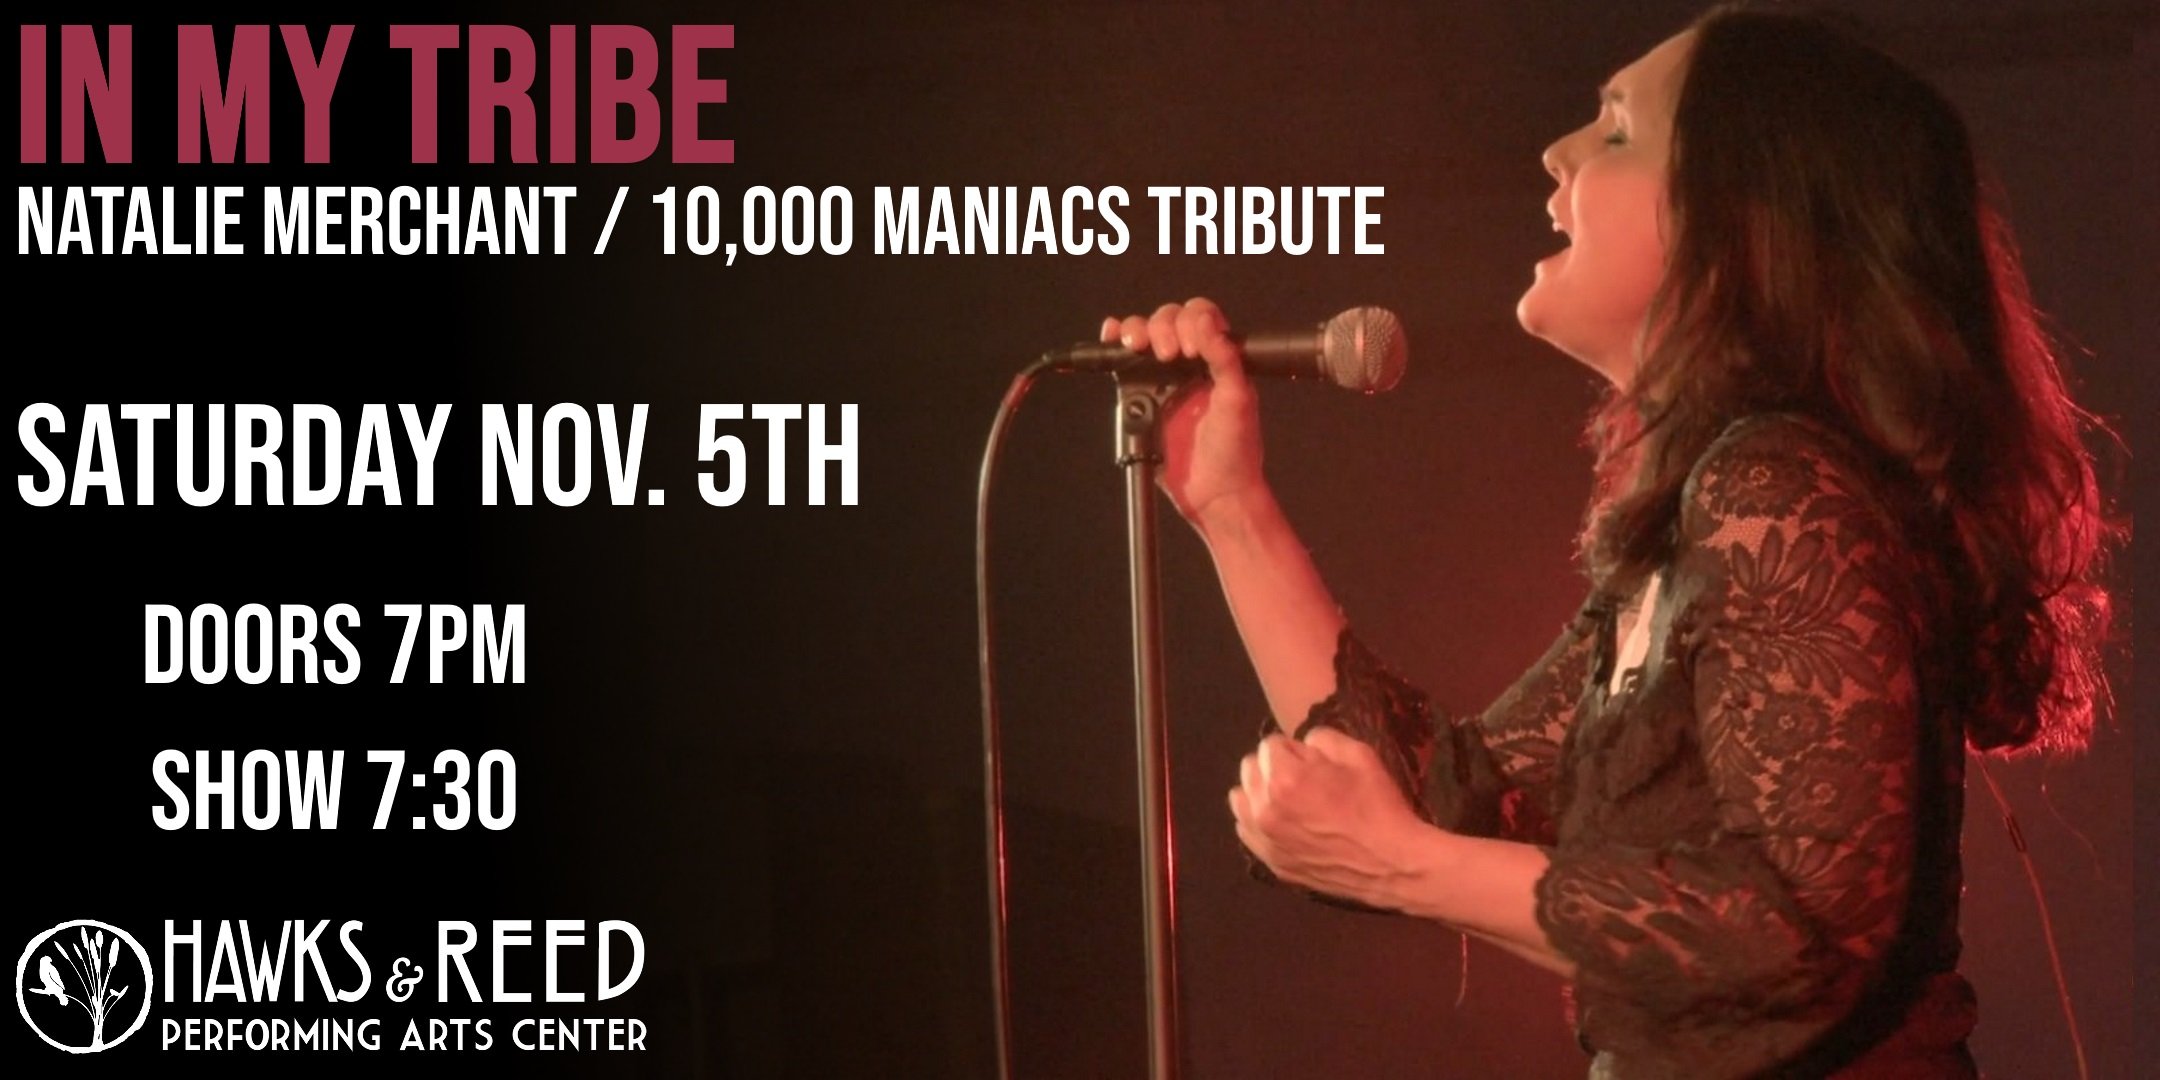 The Natalie Merchant / 10,000 Maniacs Tribute: In My Tribe at Hawks & Reed